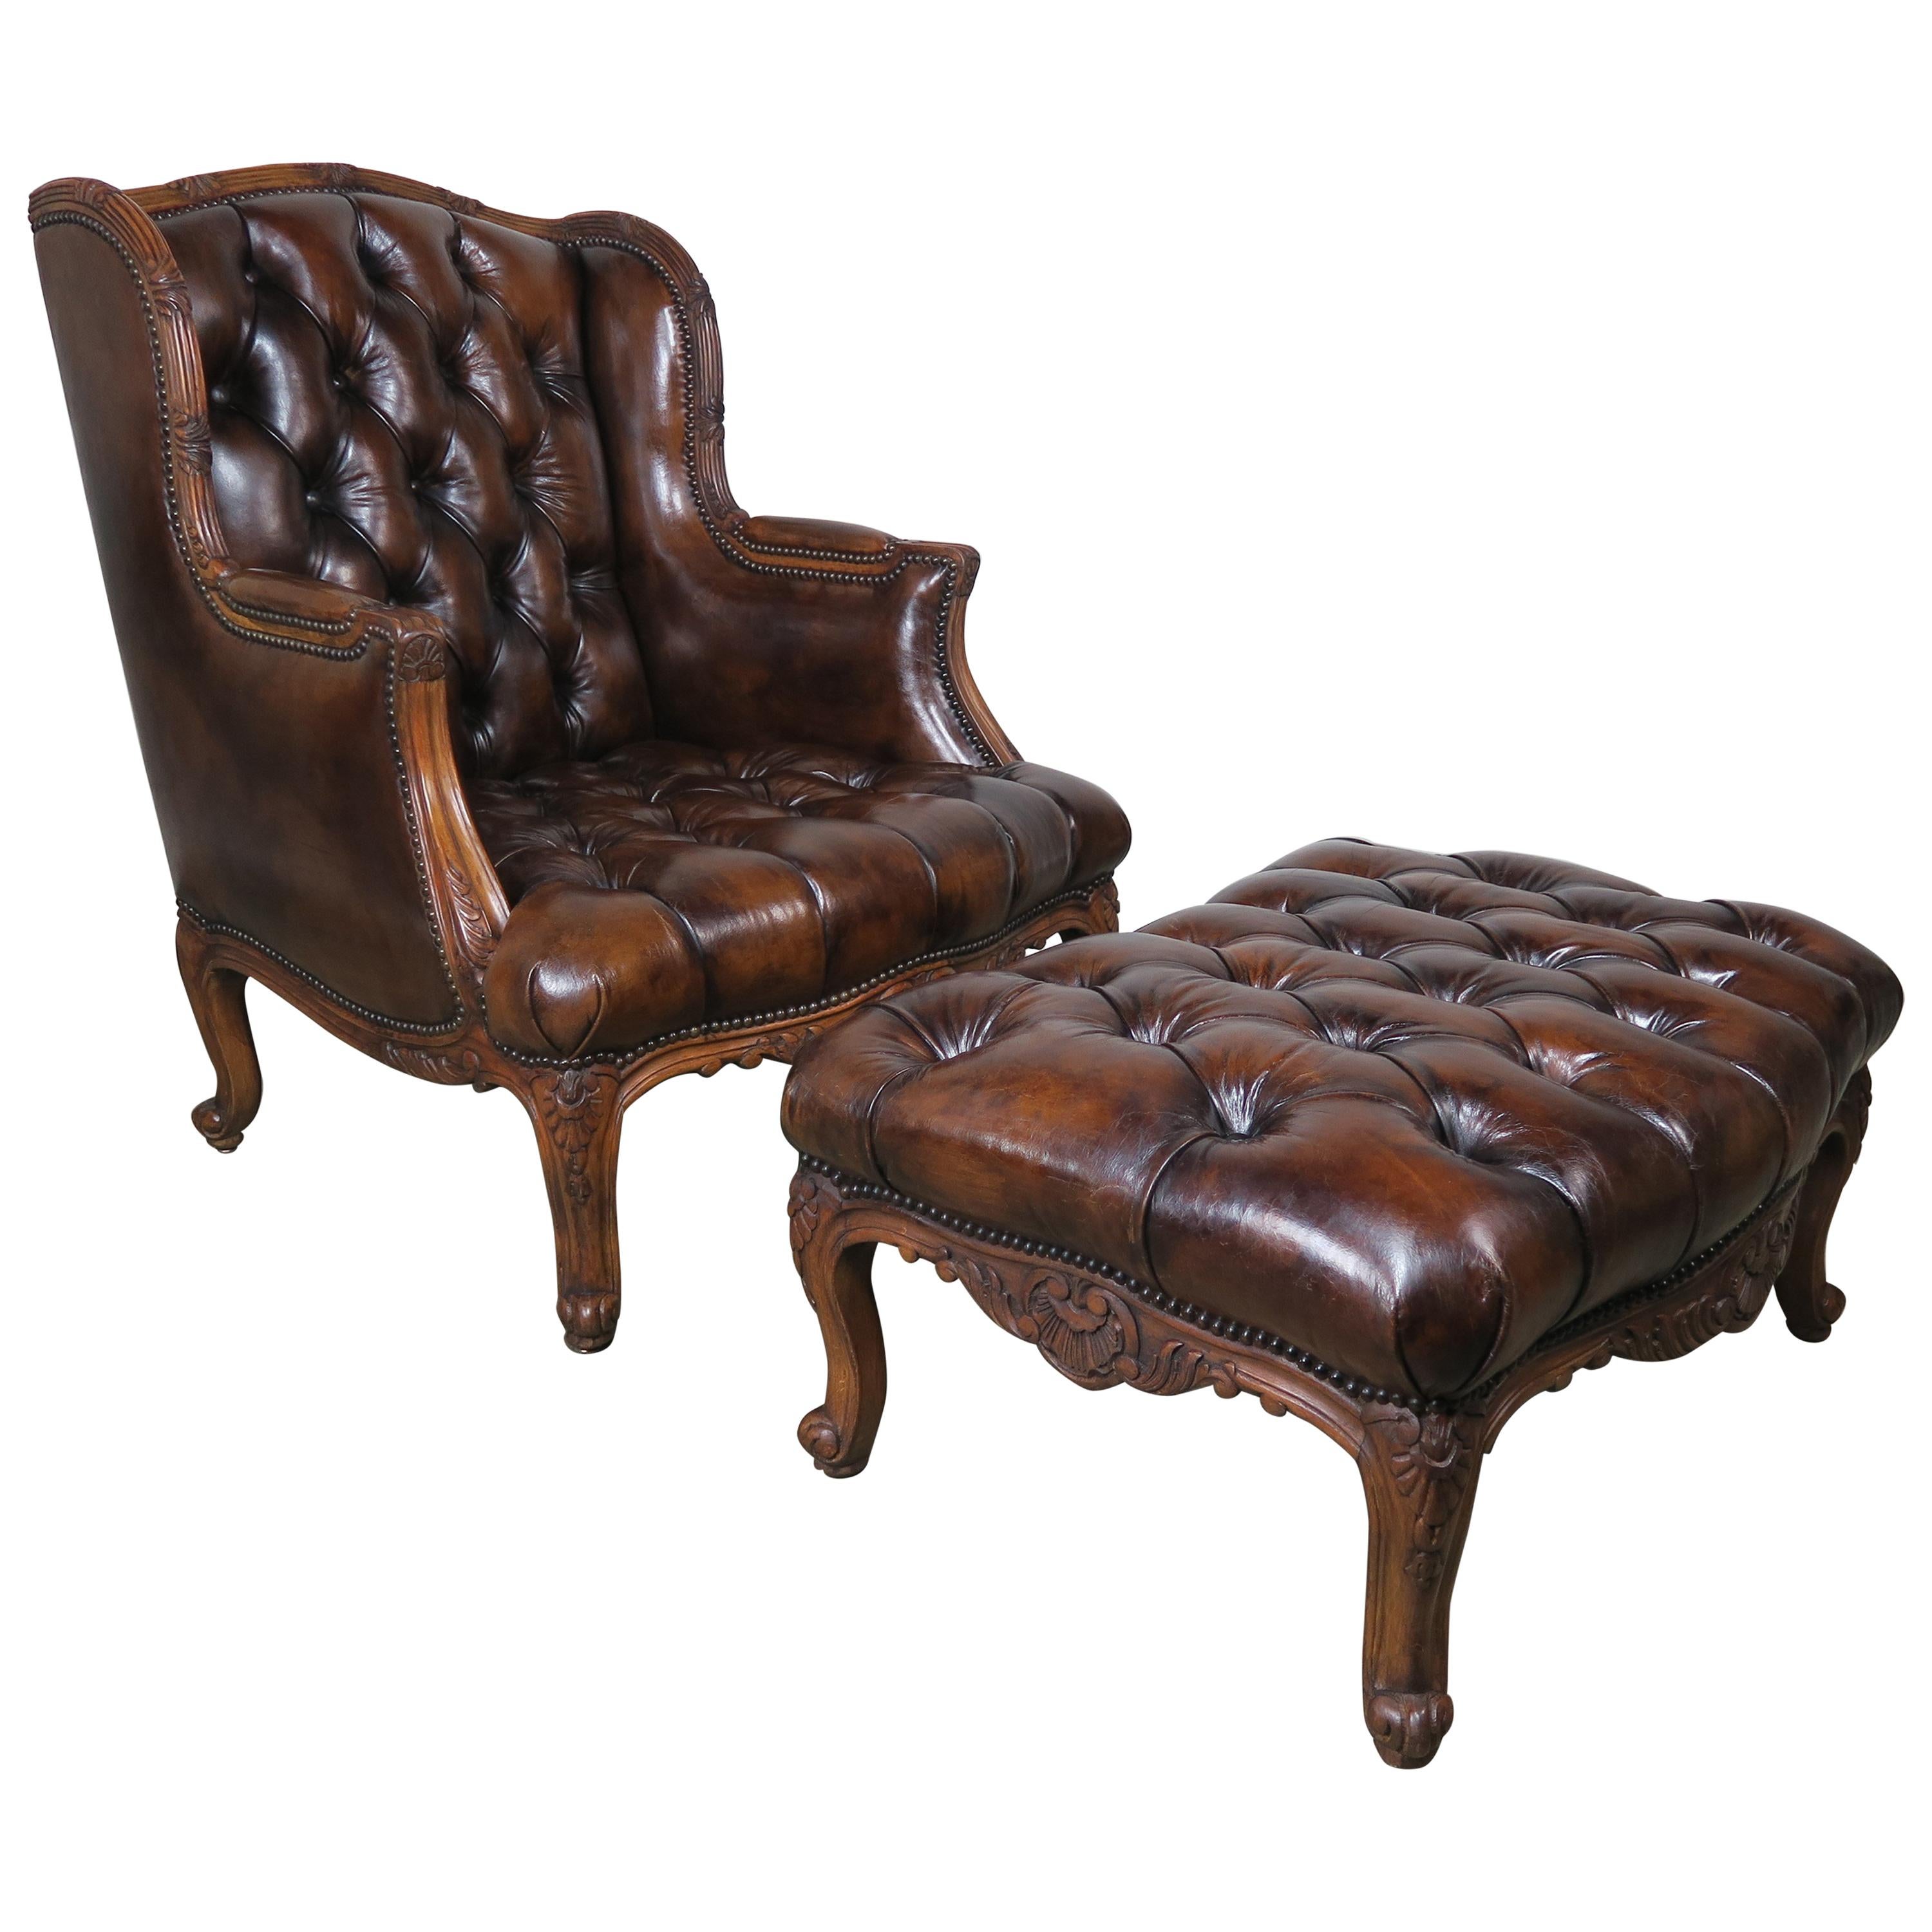 Pair of French Leather Tufted Armchairs with Matching Ottomans